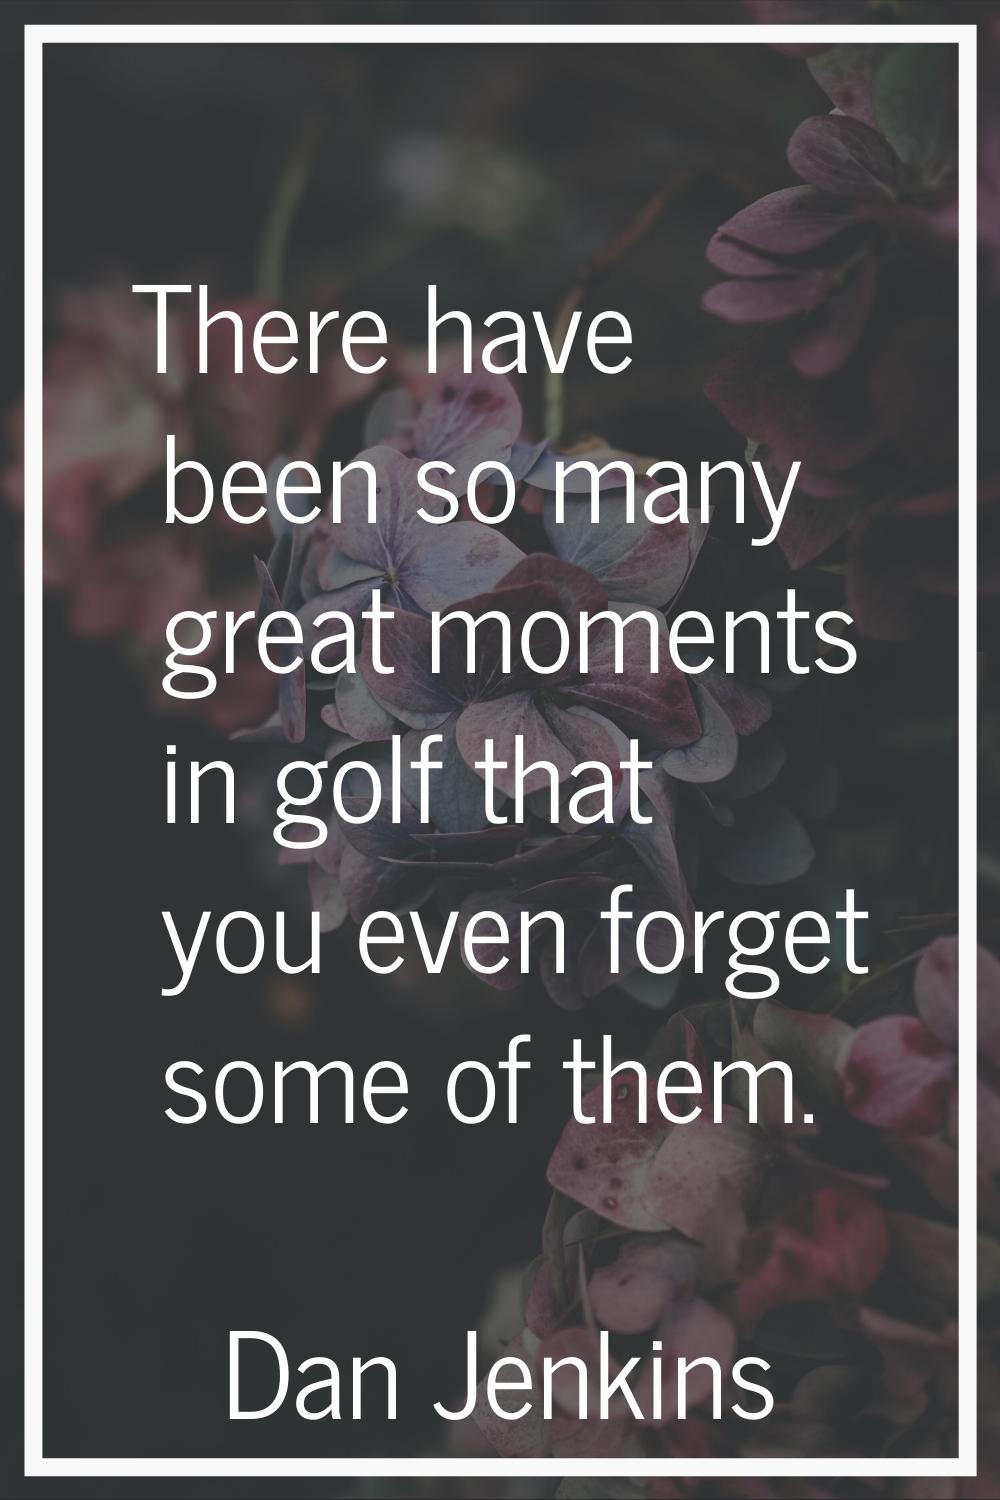 There have been so many great moments in golf that you even forget some of them.